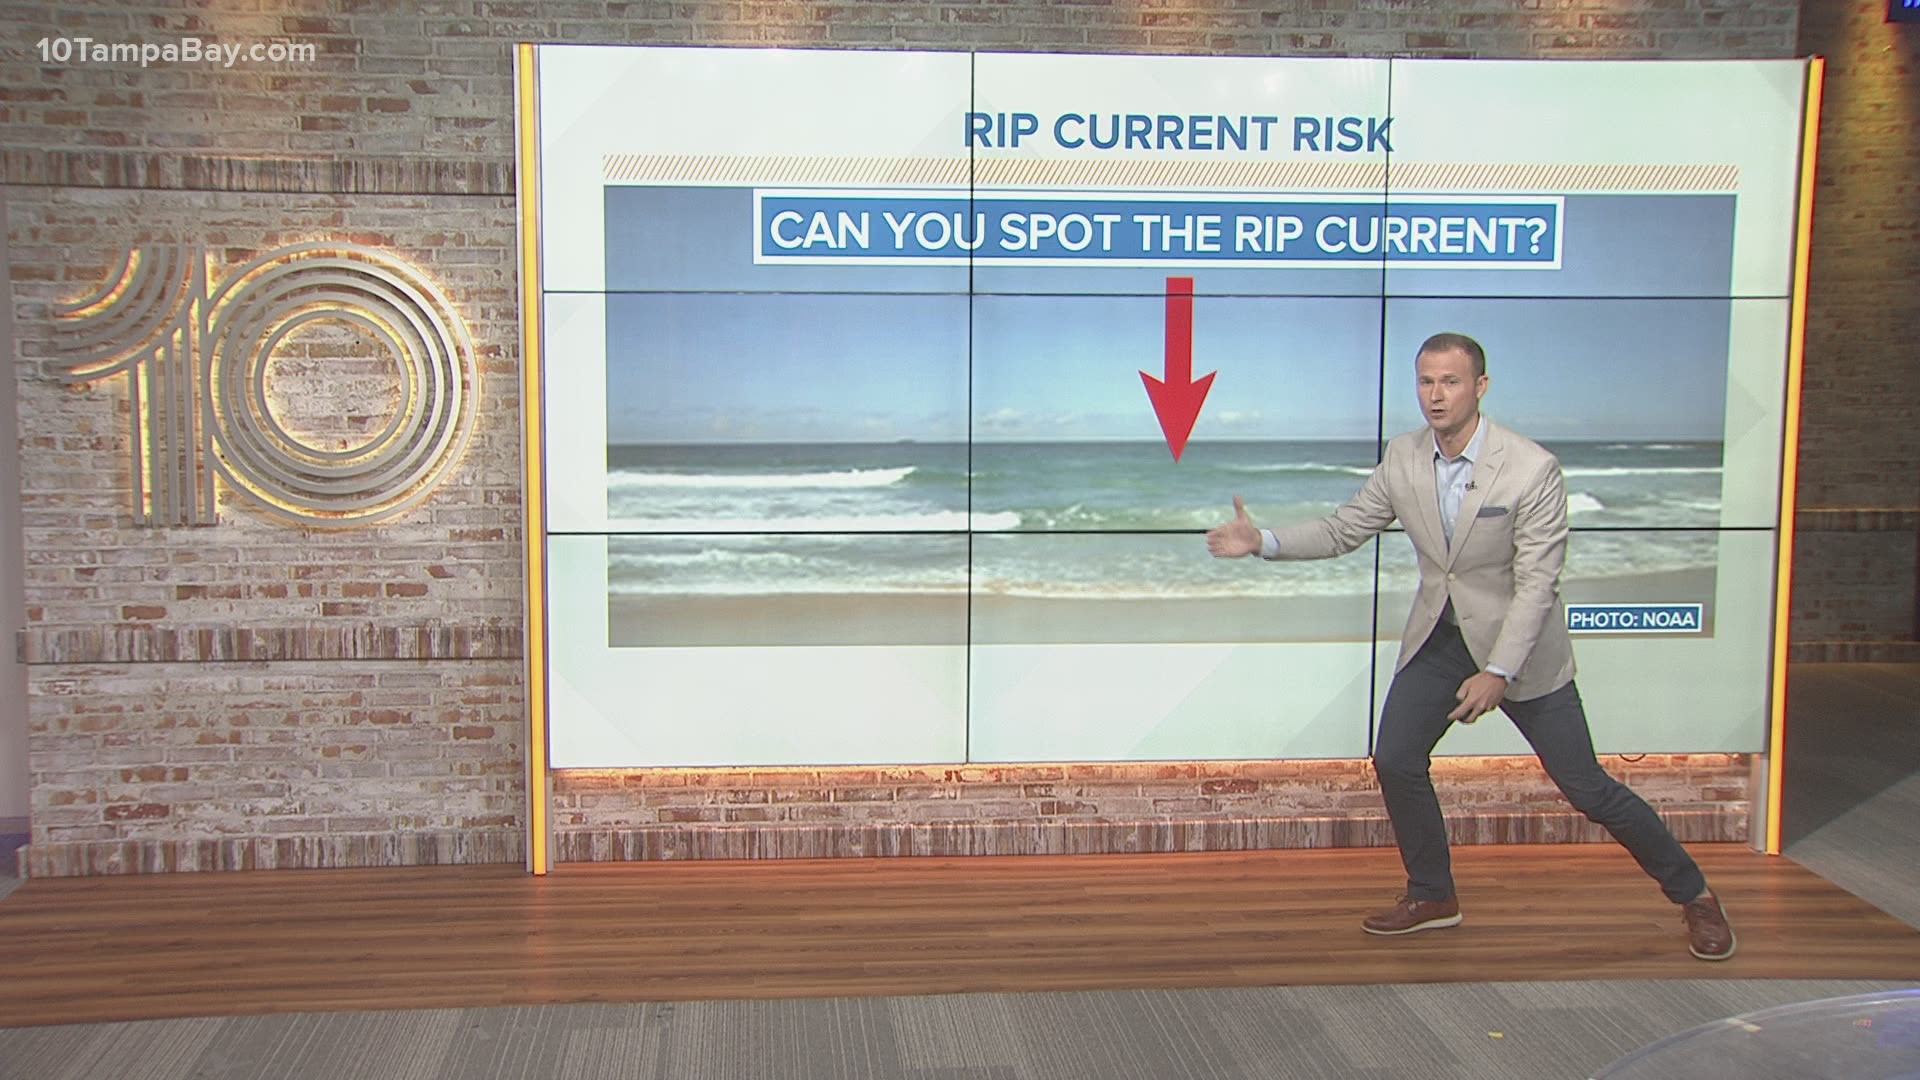 In Florida, rip currents are more deadly than hurricanes, floods, tornadoes, and lightning combined.